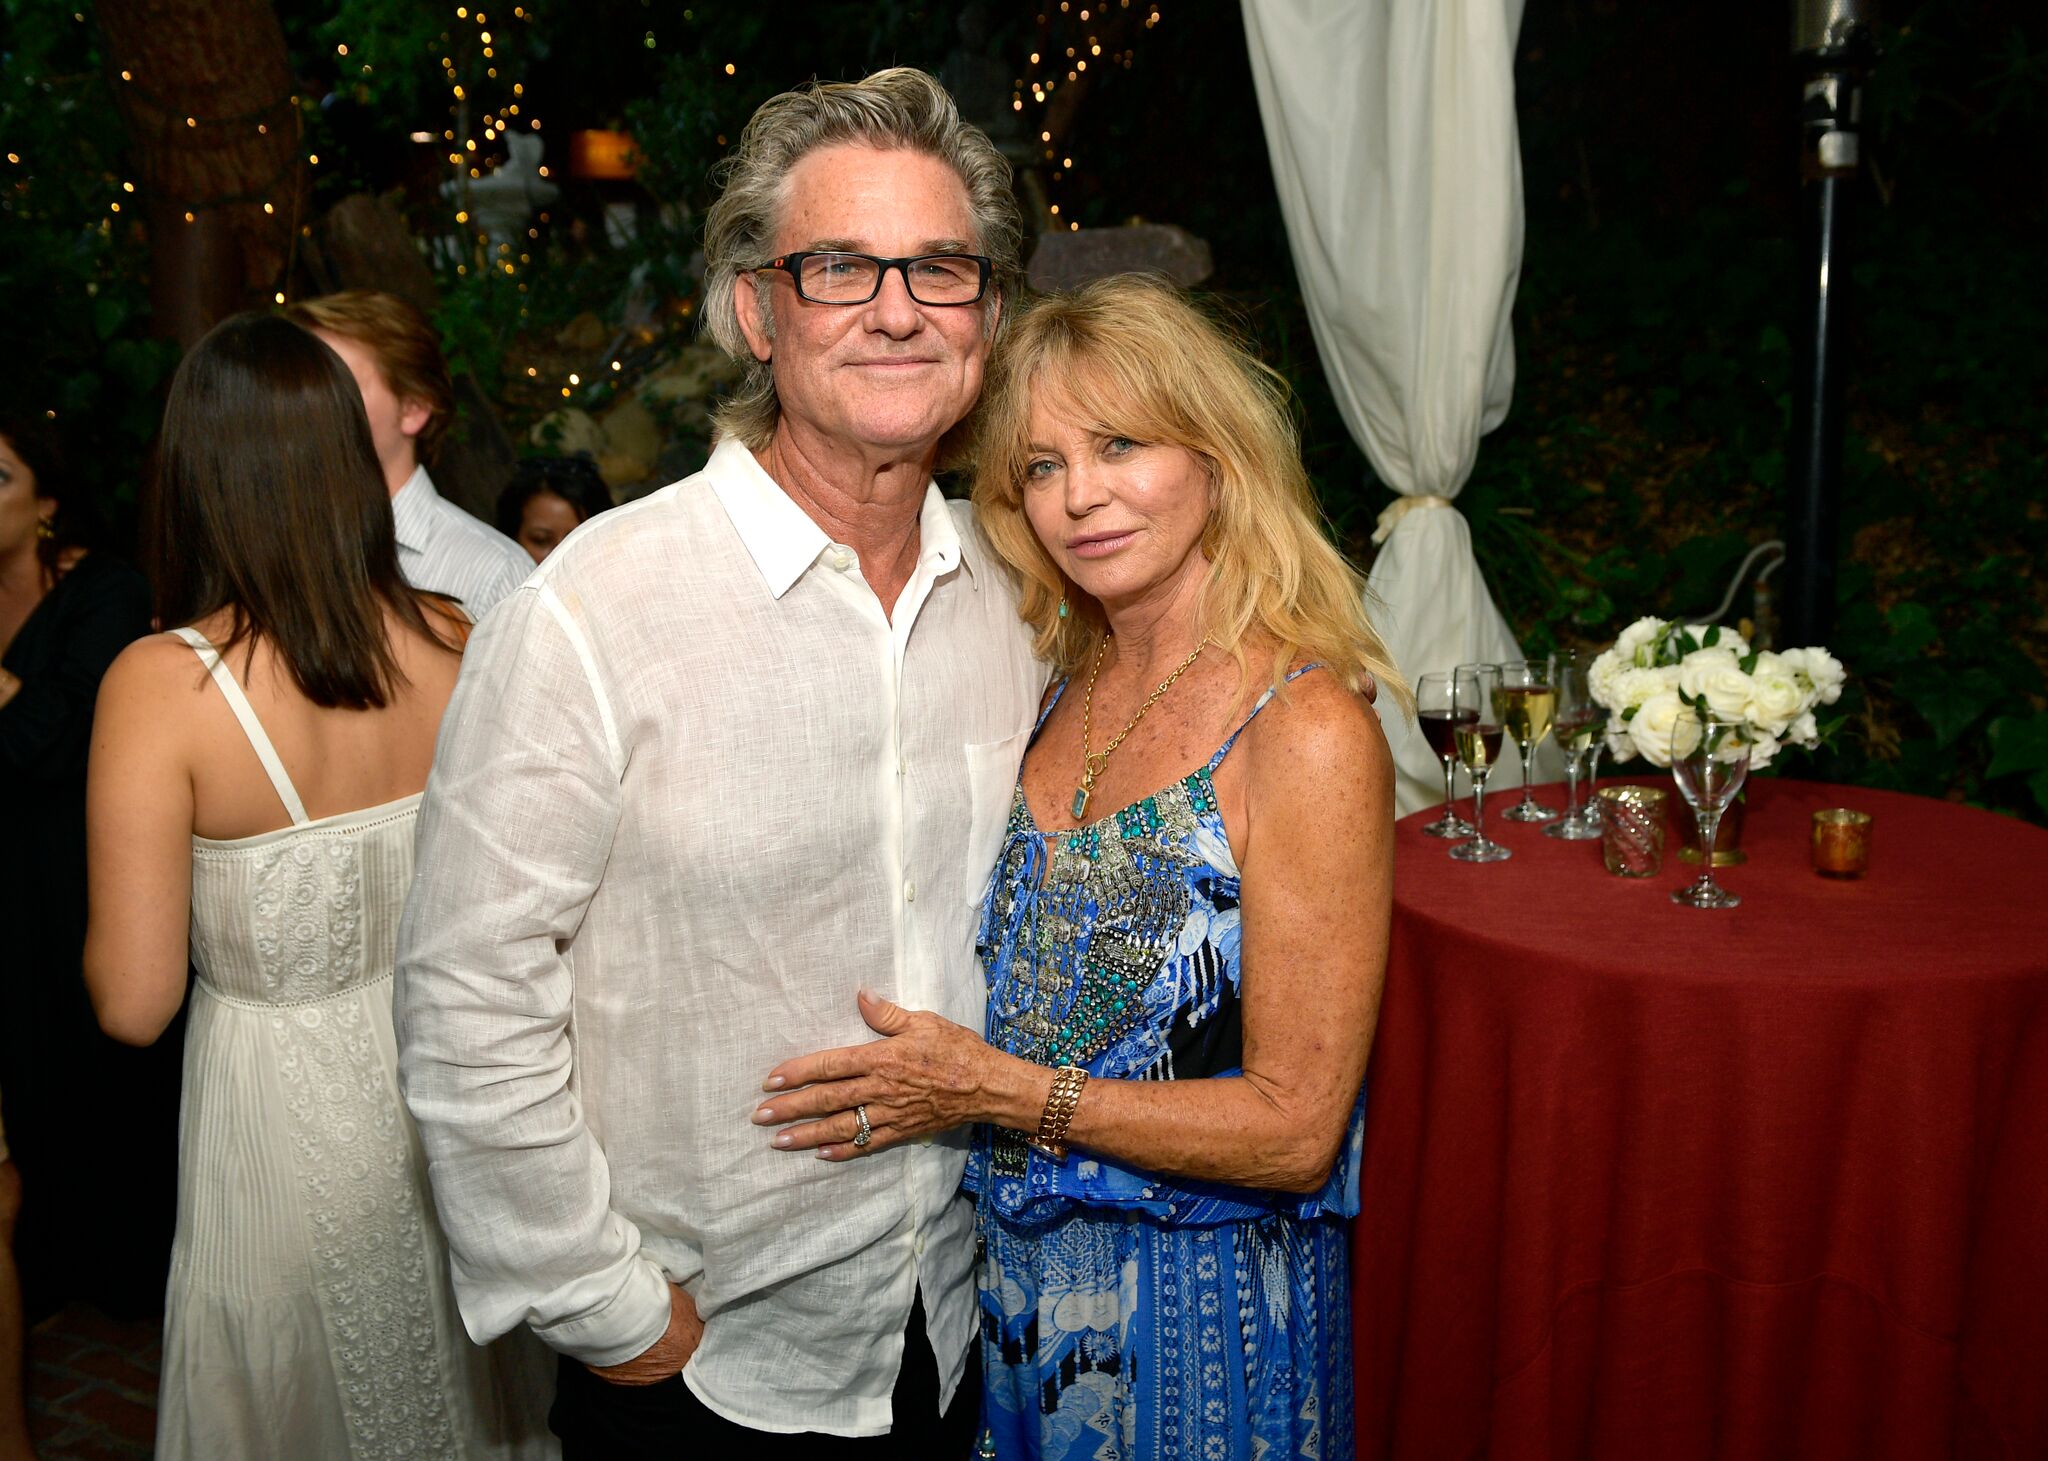 Kurt Russell and Goldie Hawn attend the "Wild Wild Country" Filmmaker Toast at Inn of the Seventh Ray | Getty Images